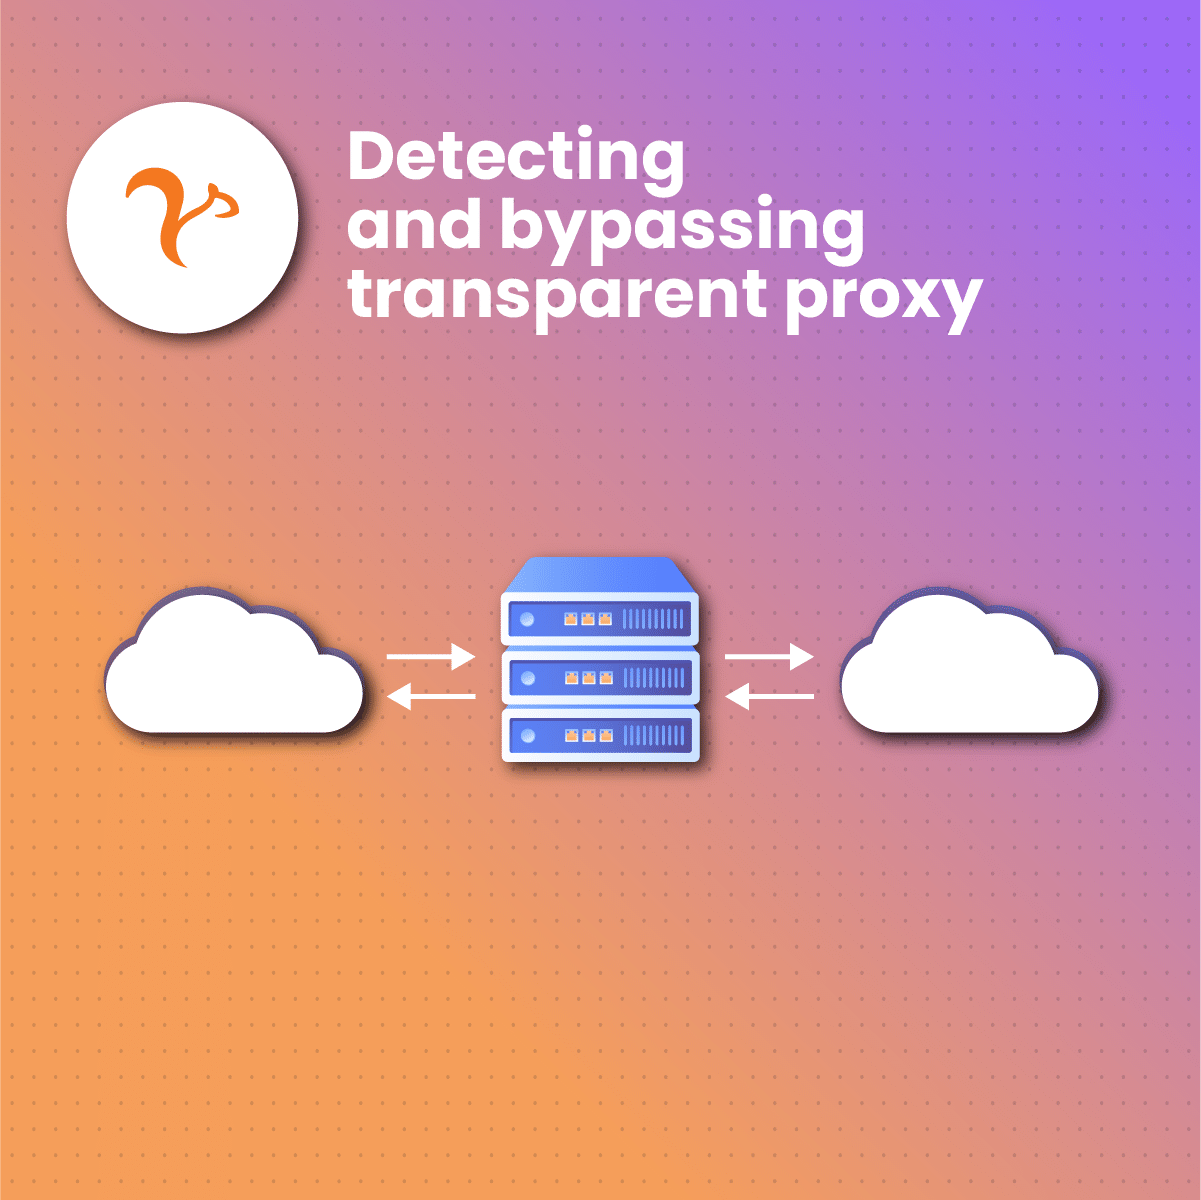 Detecting and bypassing transparent proxy